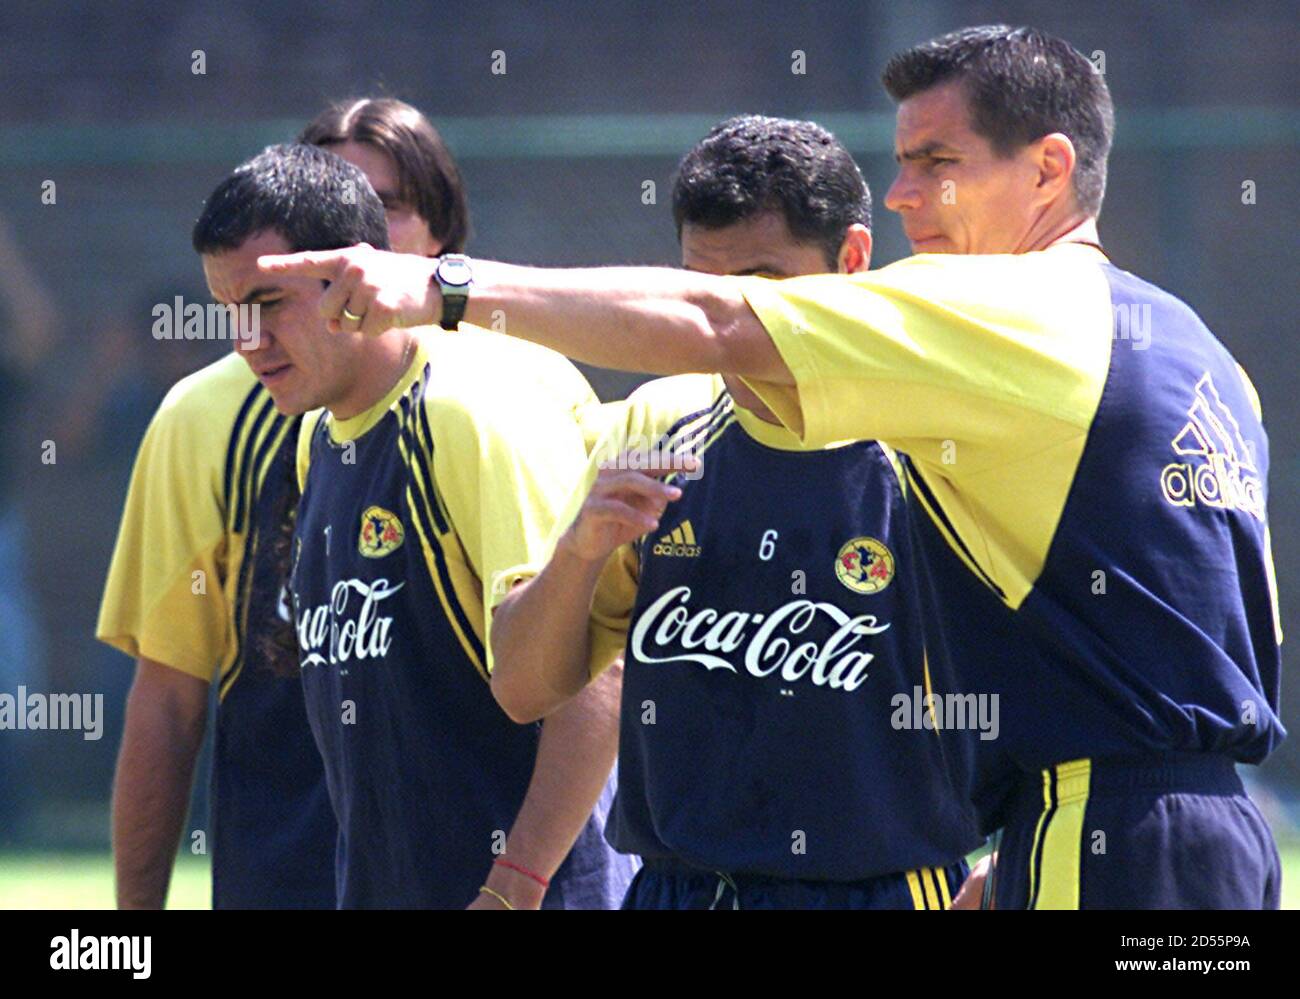 Mexico's America coach Alfredo Tena (R) points as he directs a team  training session with Cuauhtemoc Blanco (L) ahead of their Copa  Libertadores semi-final against Argentina's Boca Juniors, June 5. The two